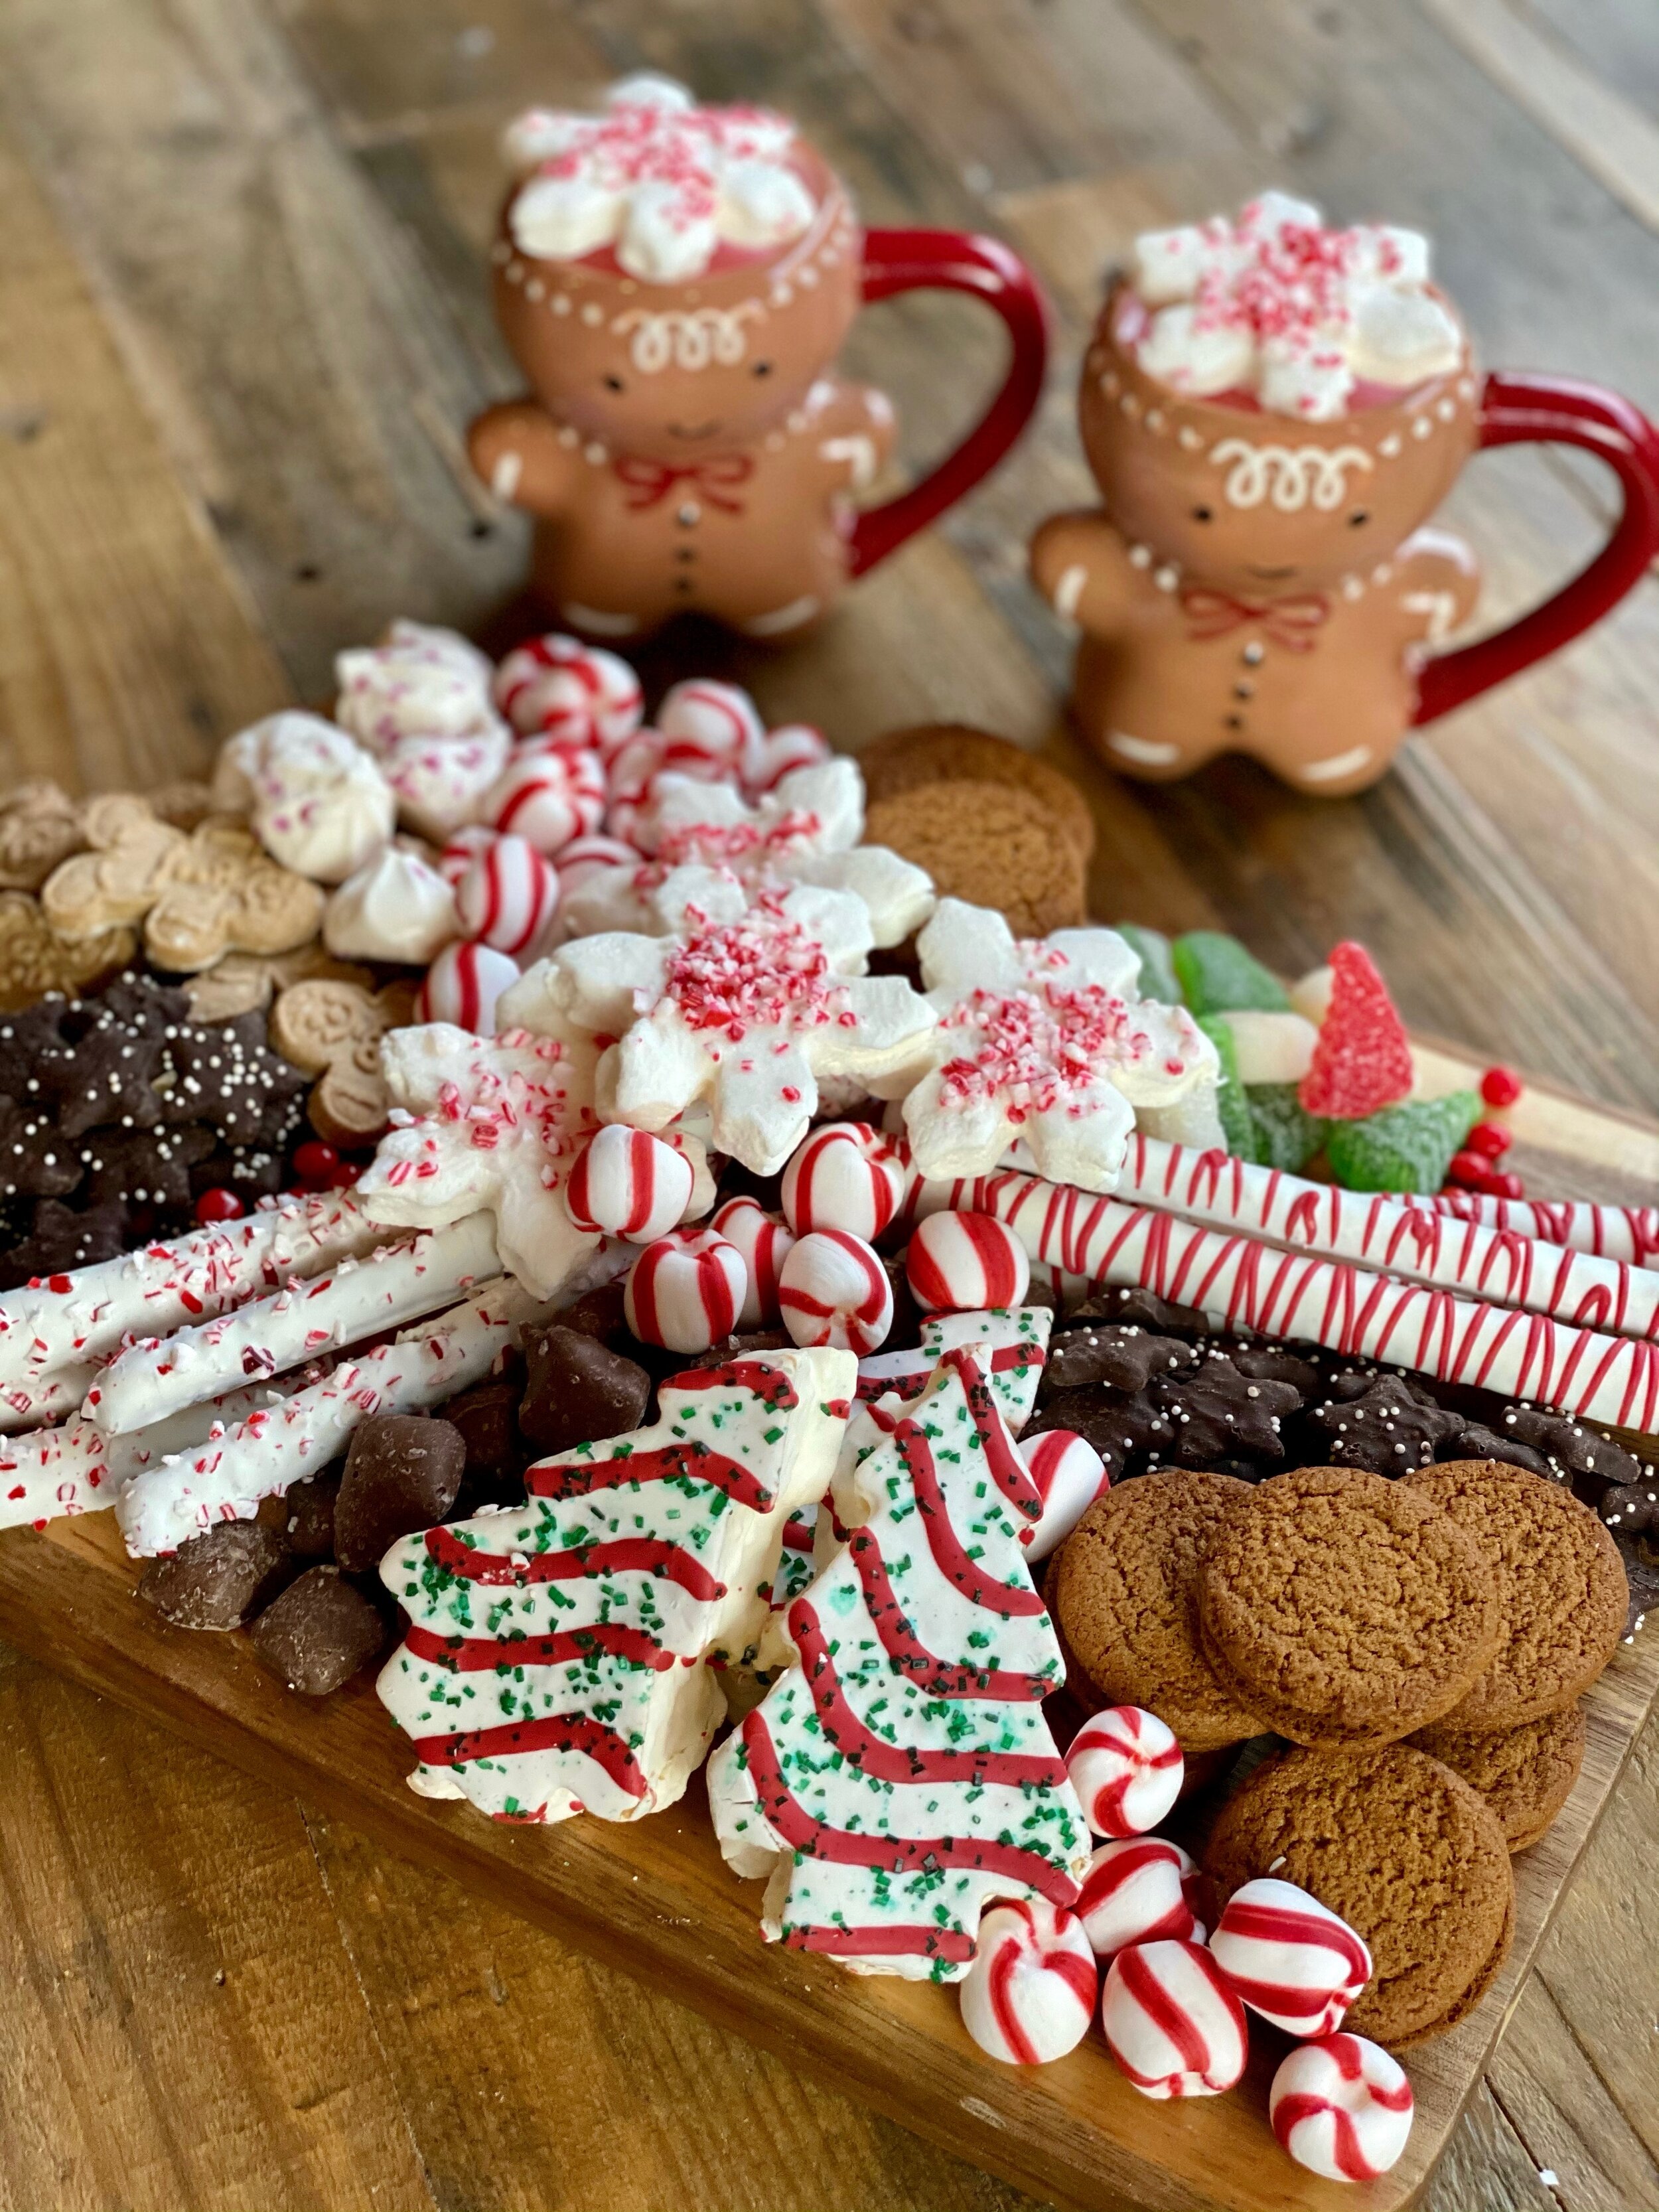 Dining Delight: Hot Cocoa Bar with Gingerbread Theme  Gingerbread  christmas decor, Christmas hot chocolate bar, Christmas hot chocolate